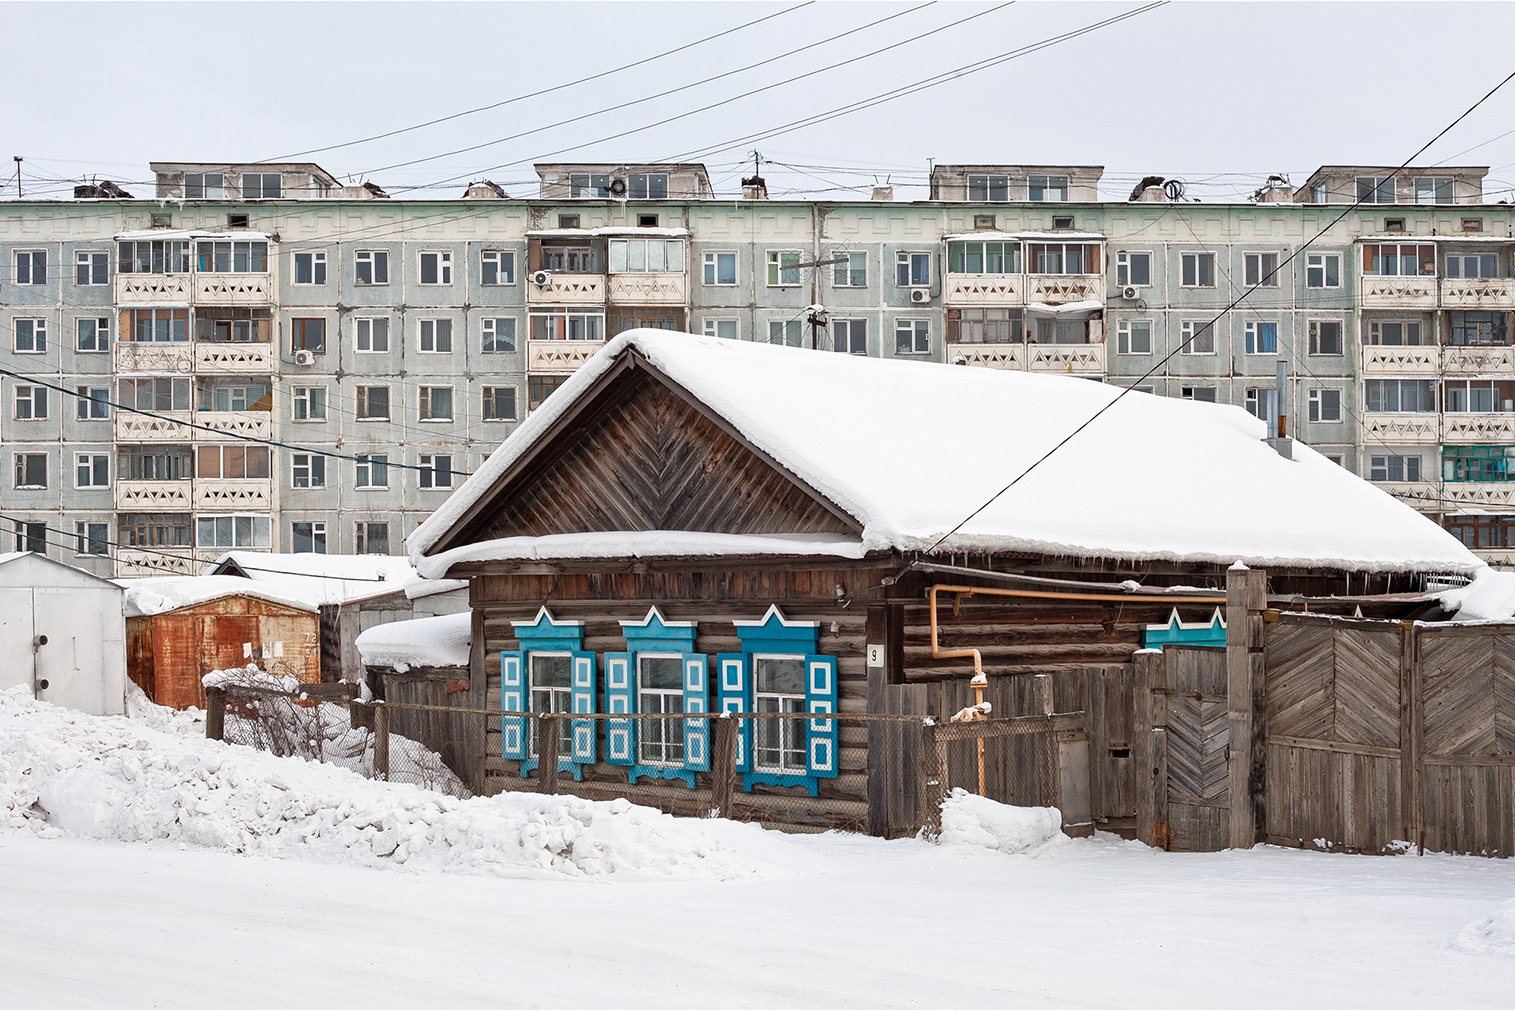 A typical Yakutian Izba and a prefab panel block from the late 1980s. Photography: Alexander Veryovkin © Zupagrafika, 2020